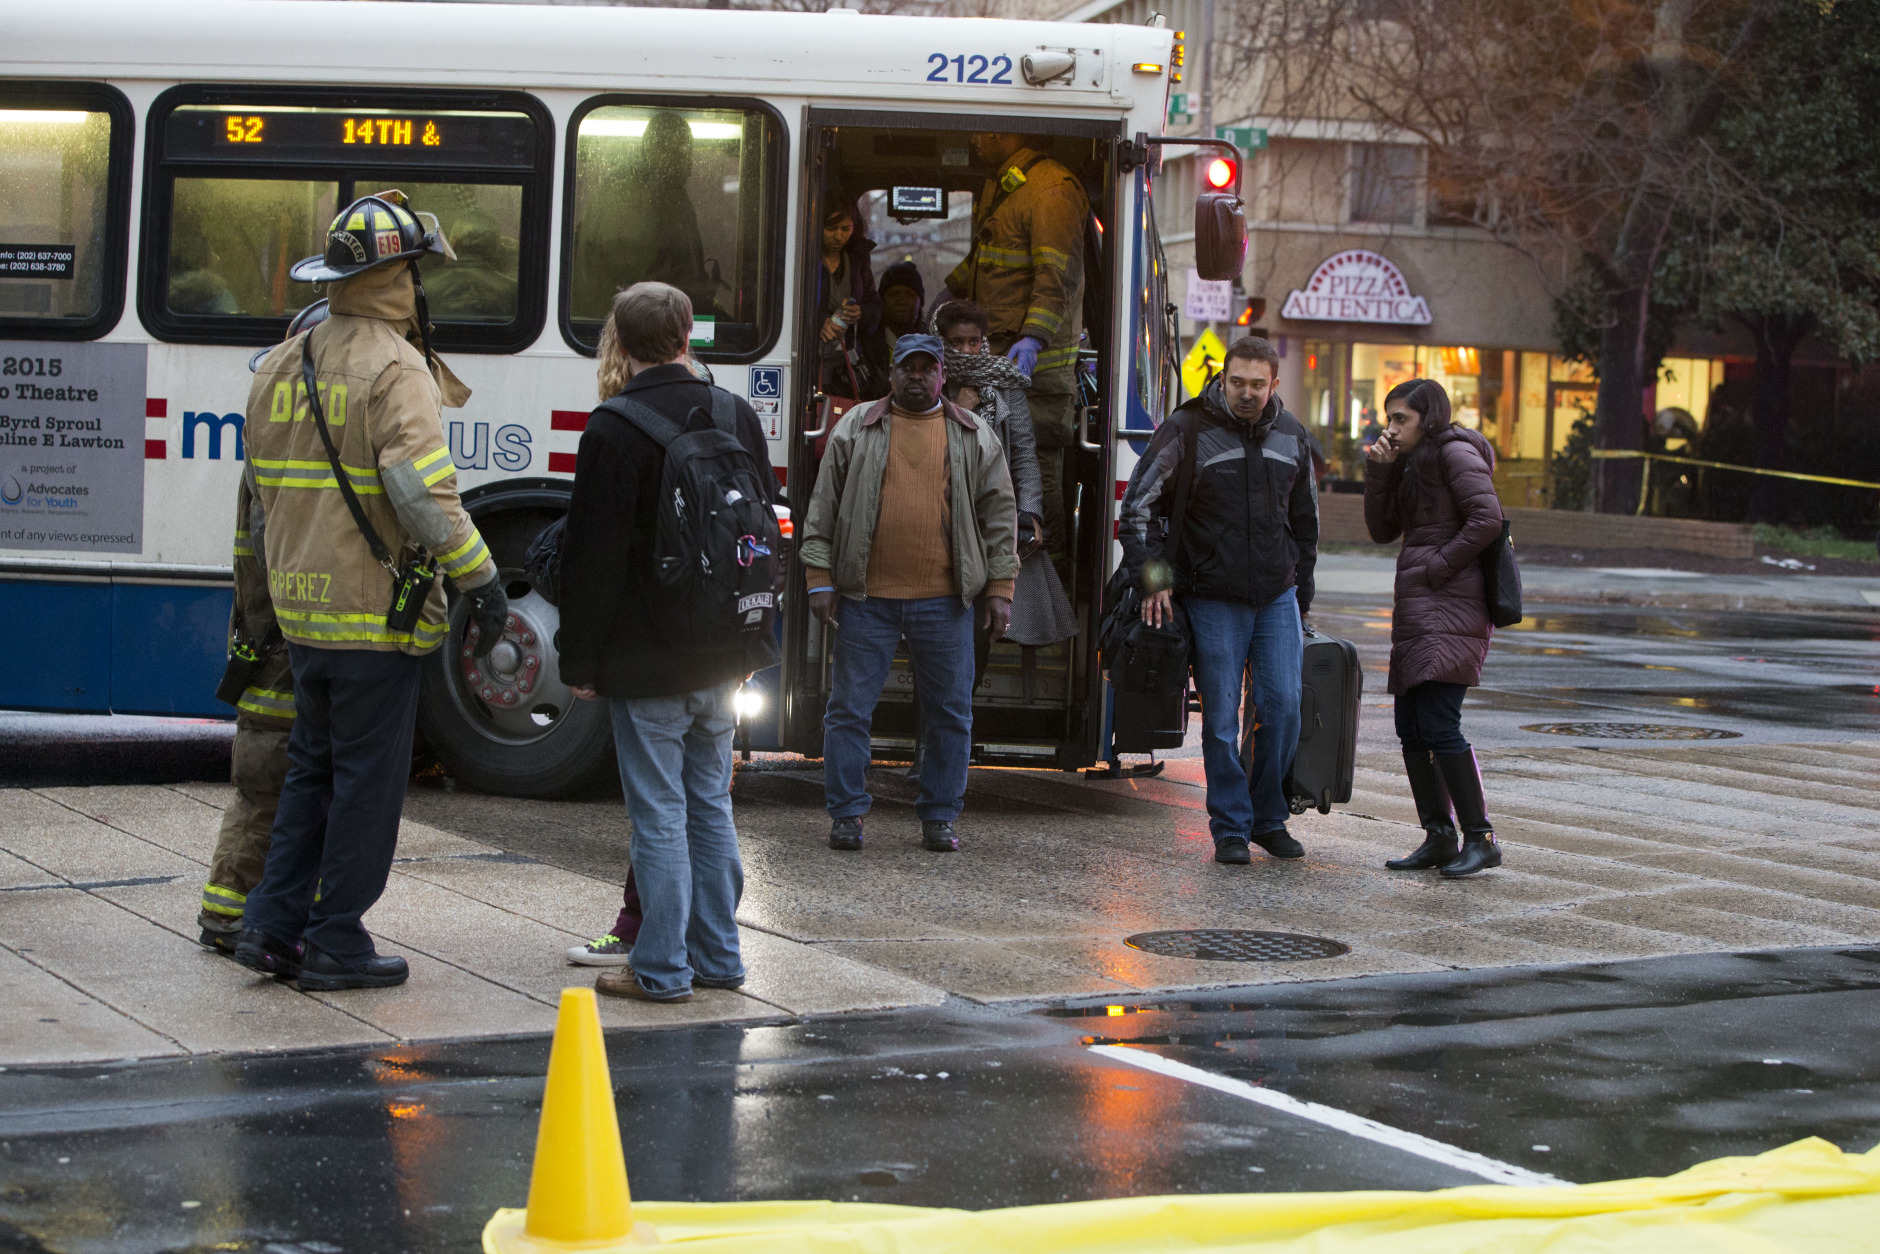 Coughing people are sorted for triage needs after being  evacuated from a smoke filled Metro subway tunnel in Washington, Monday, Jan. 12, 2015.  Metro officials say one of the busiest stations in downtown Washington has been evacuated because of smoke.  Authorities say the source of the smoke is unknown.   (AP Photo/Jacquelyn Martin)